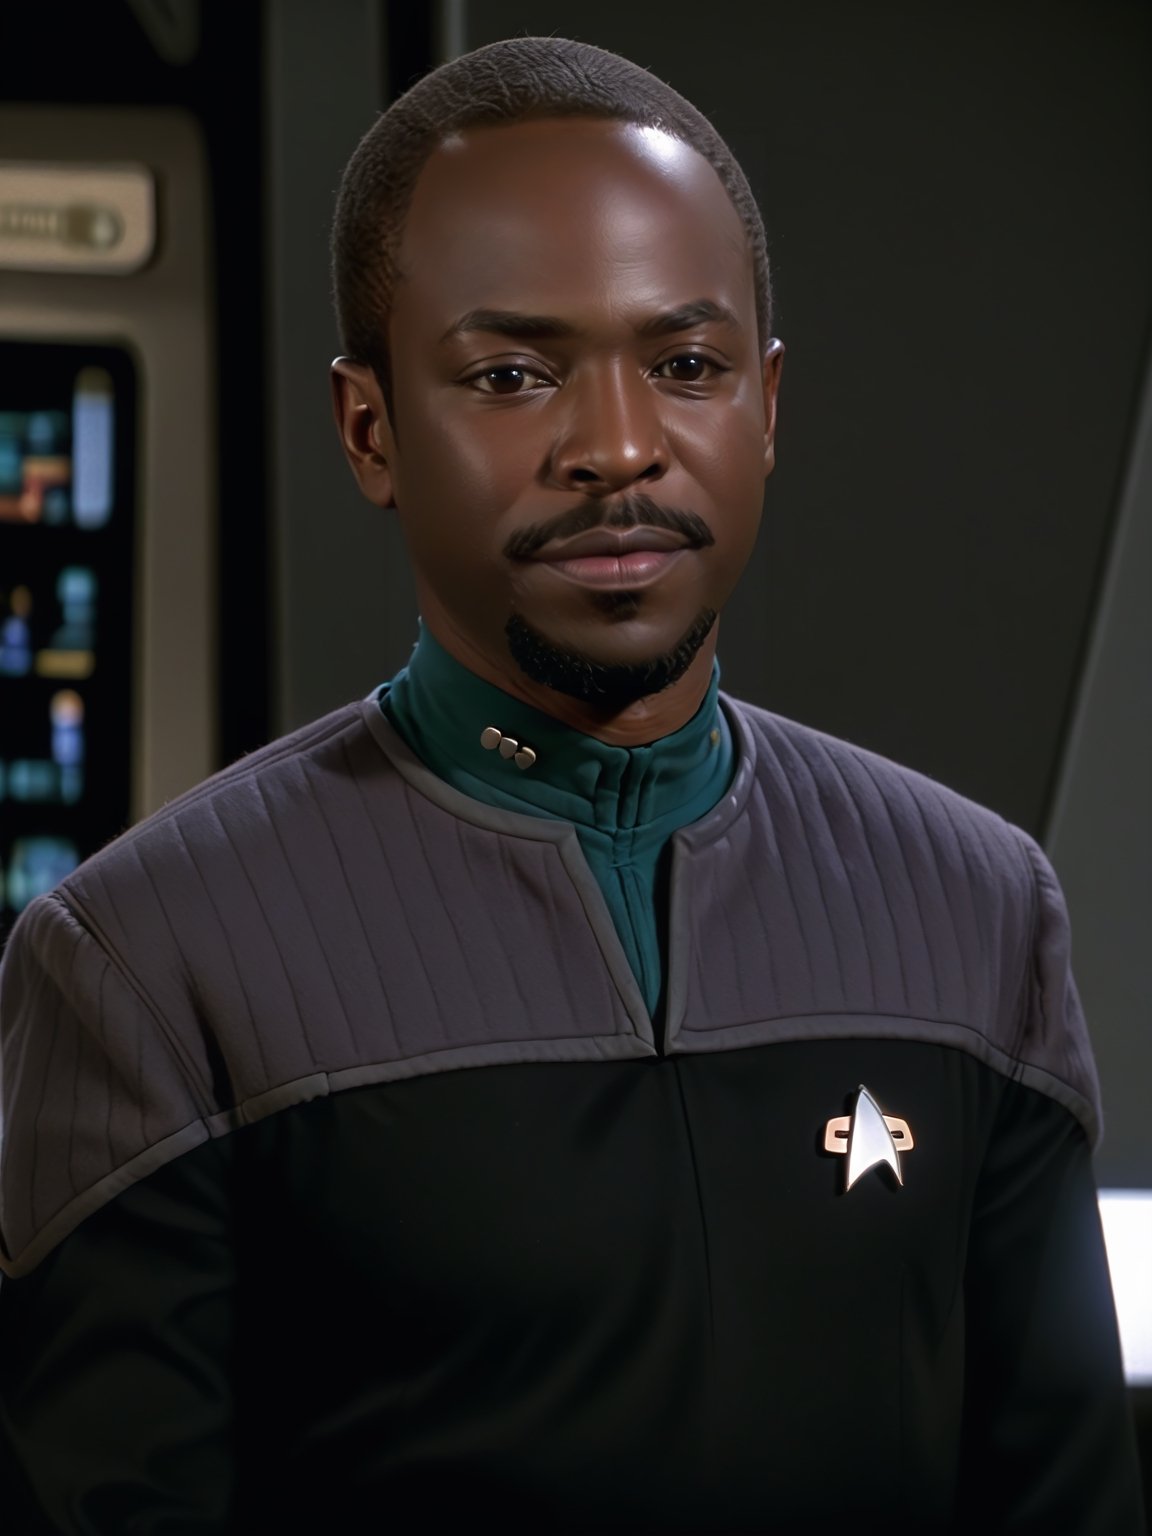 african in black and grey ds9st uniform,teal collar